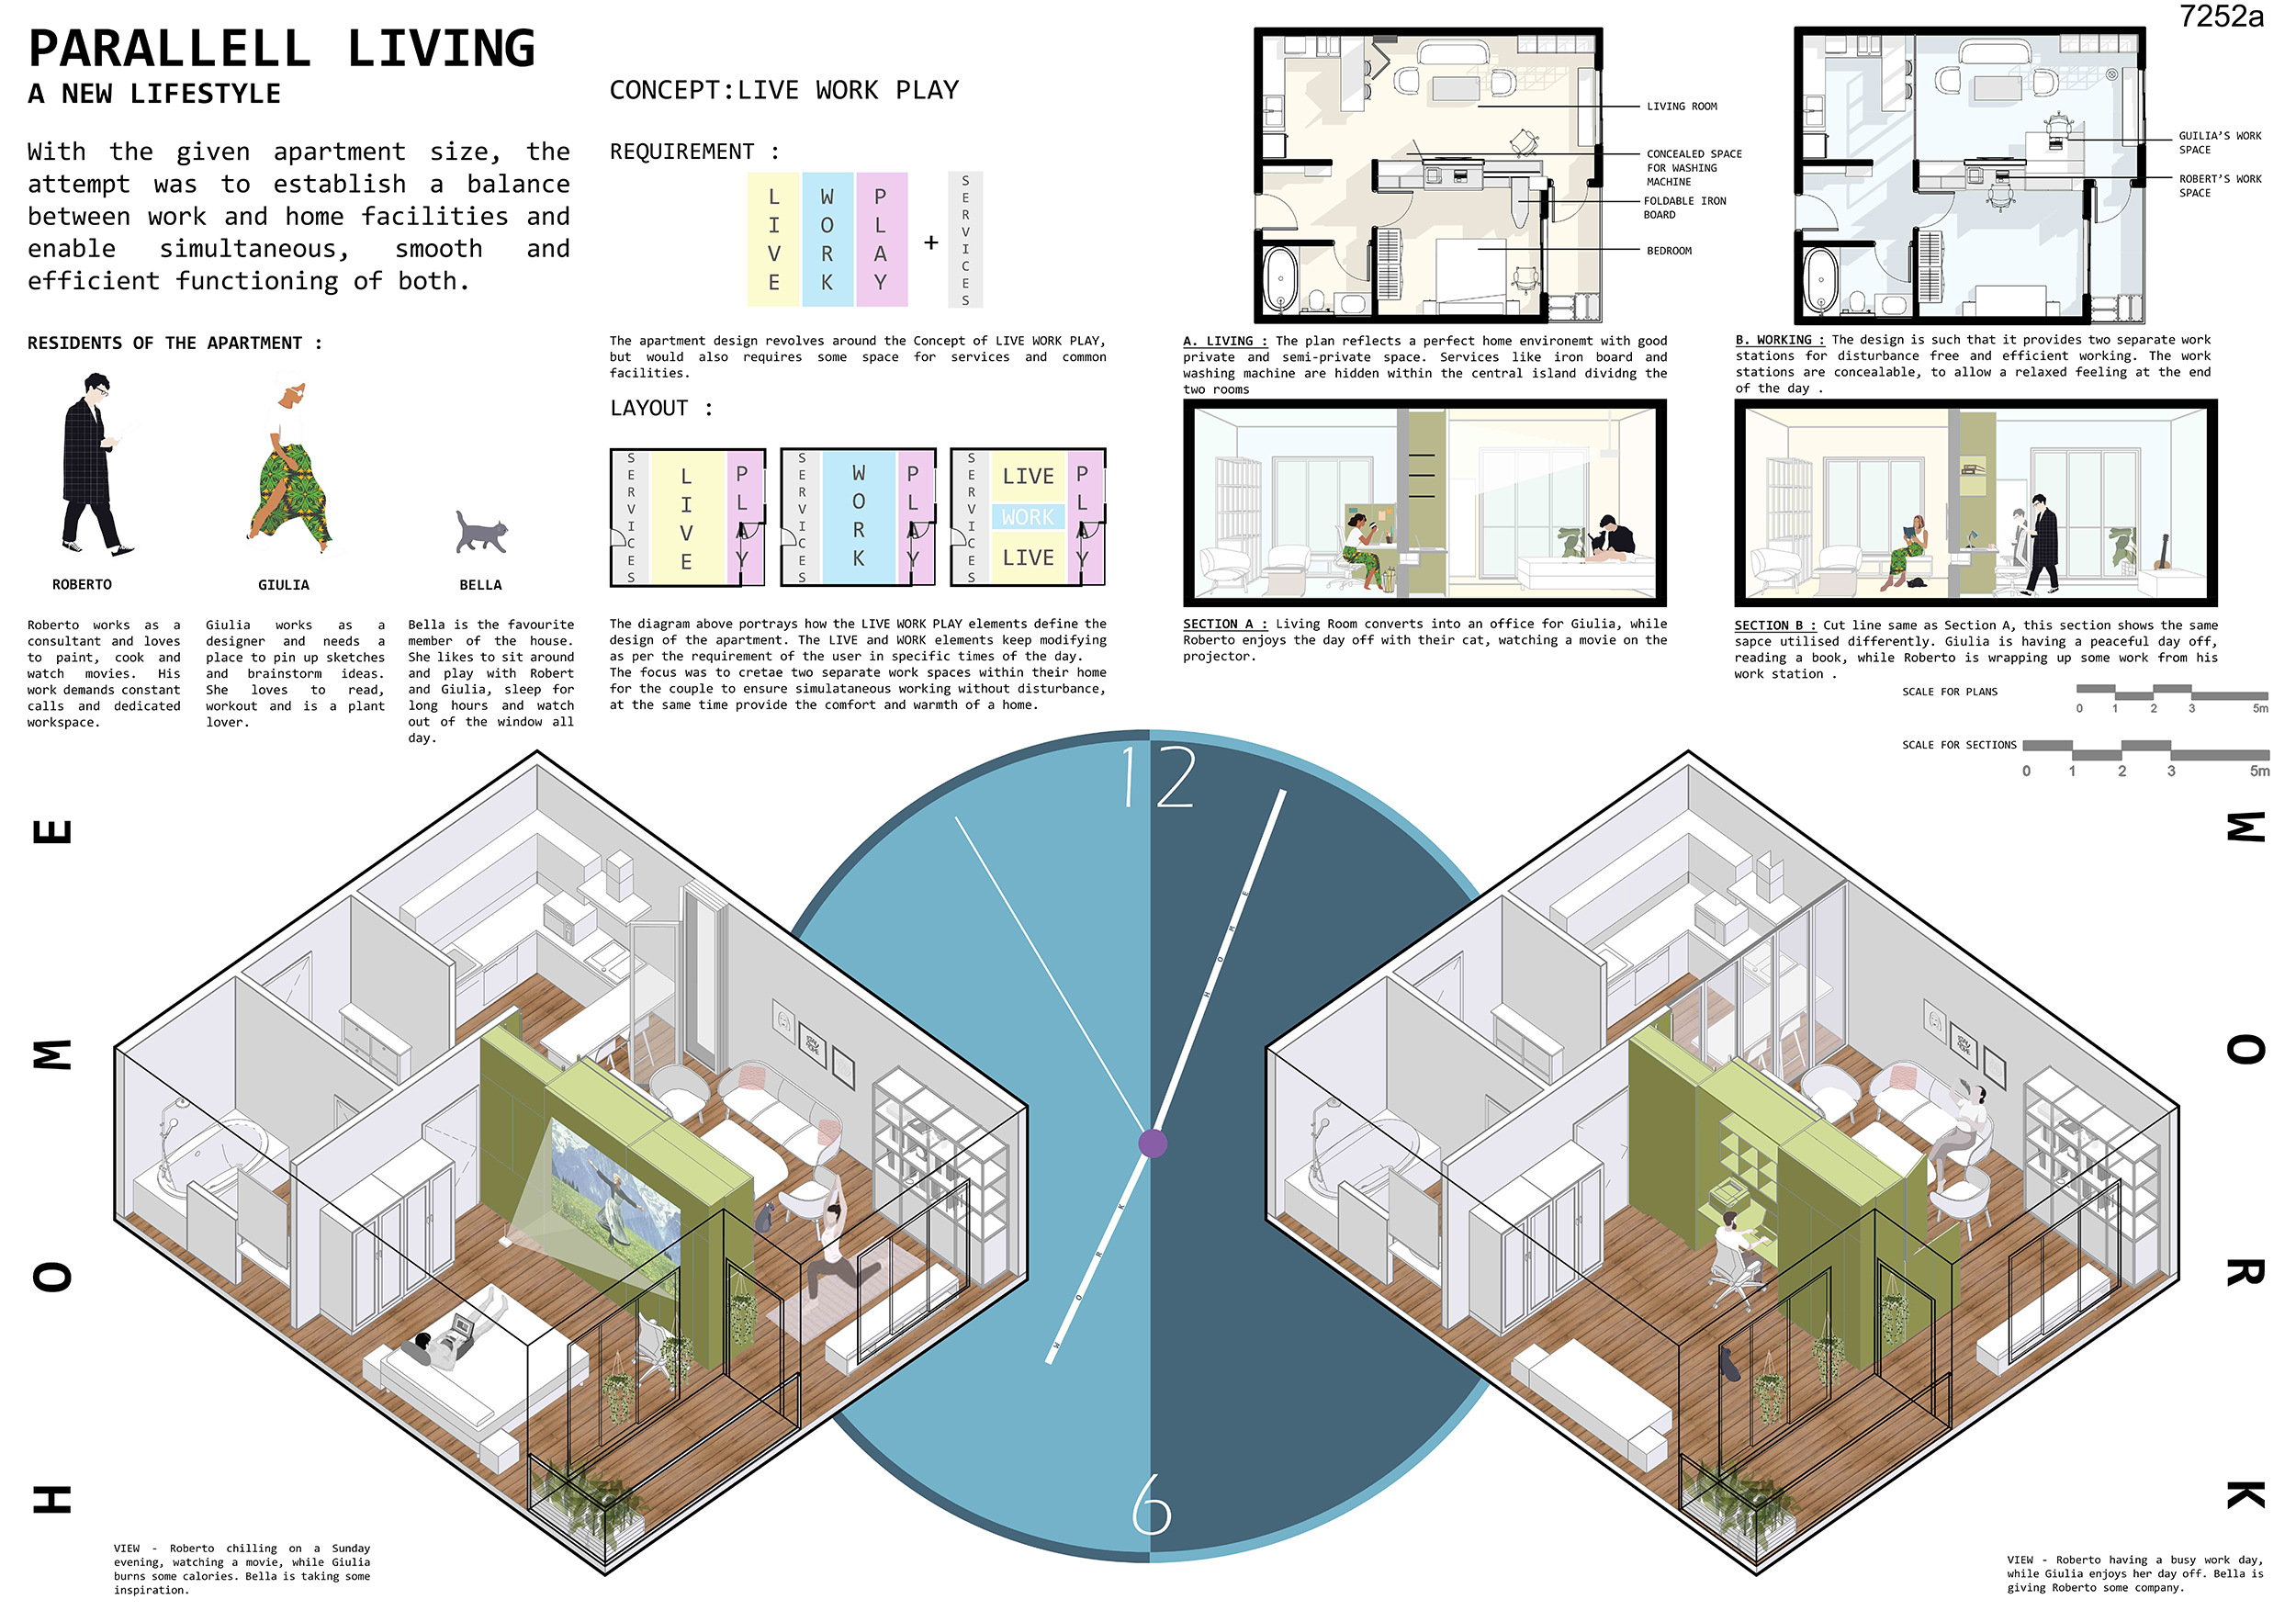 Parallel Living, A New Lifestyle Board